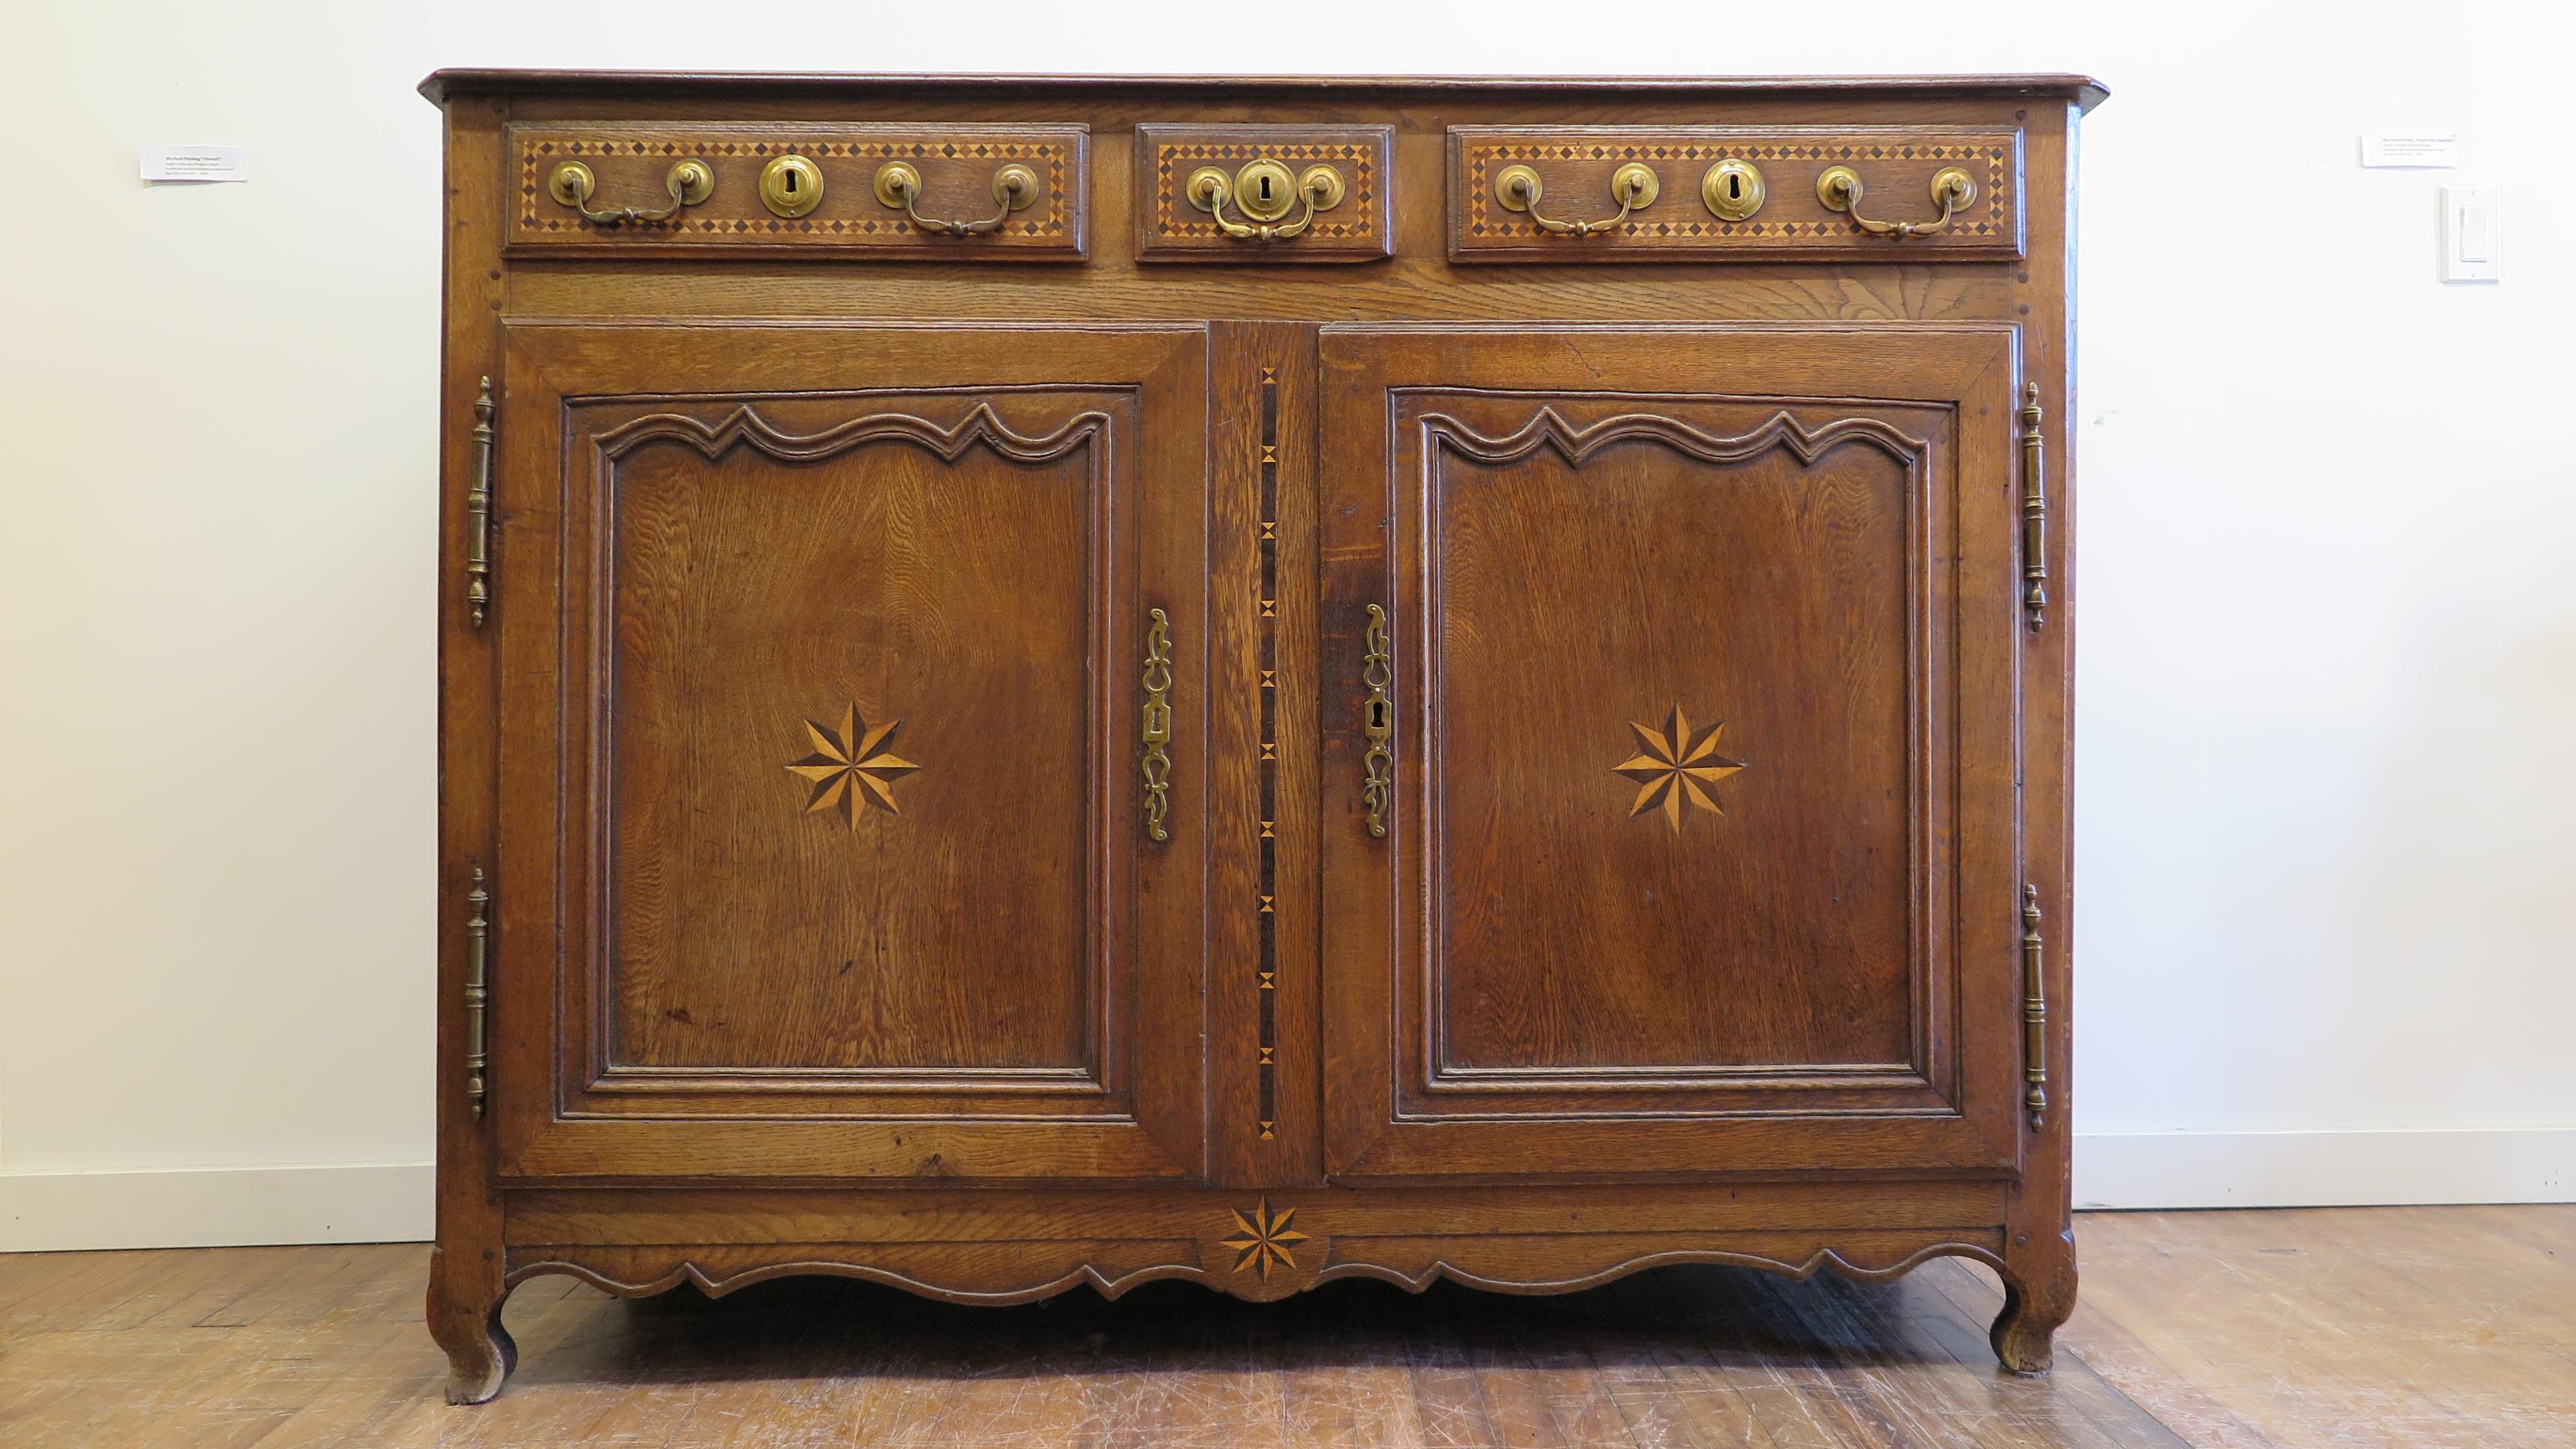 19th century French Provincial sideboard. French credenza walnut and oak with fruit wood inlay, and brass hardware. Excellent Marquetry inlay work throughout the piece. Another detail of hand made craftsmanship notice the angle of the inside panel